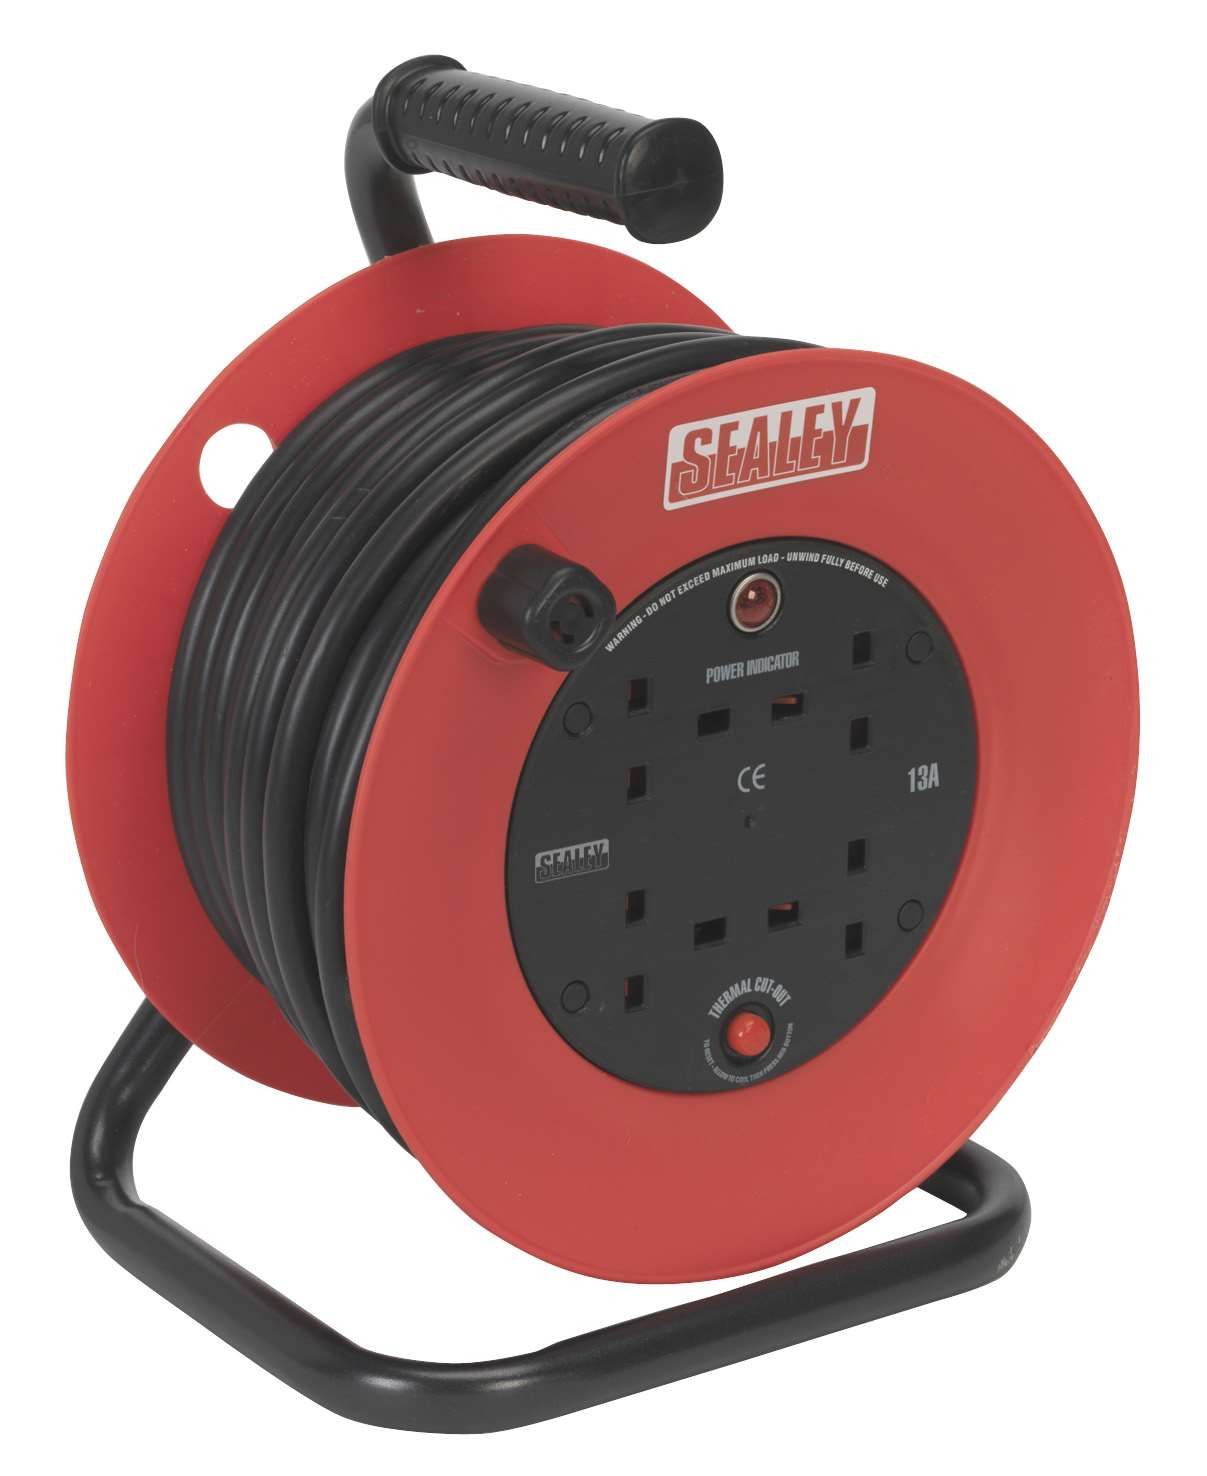 Sealey CR22525 - Cable Reel 25mtr 4 x 230V 2.5mm² Heavy-Duty Thermal ...